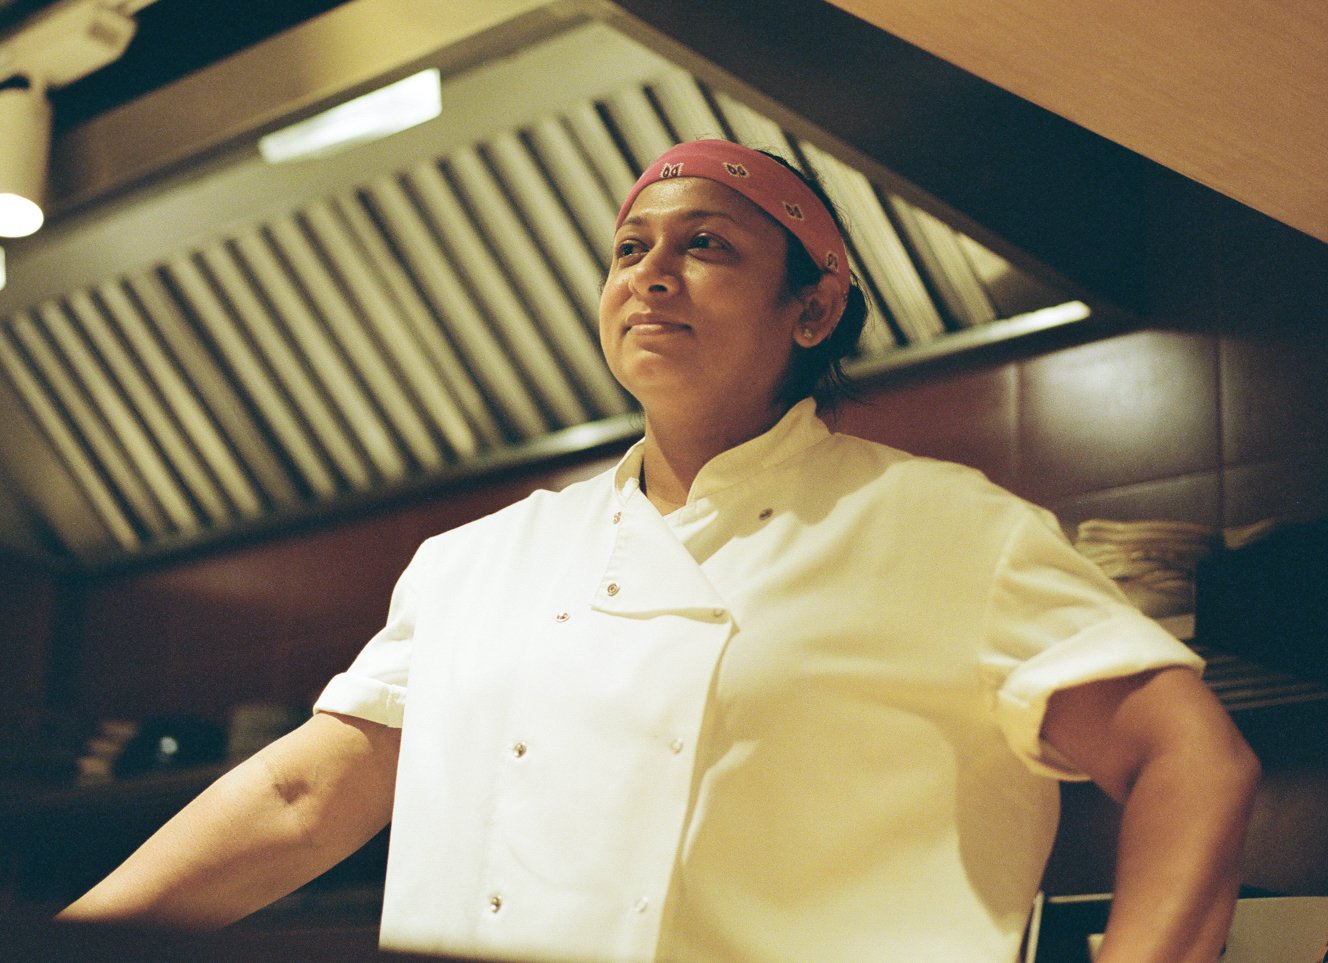 hotal-colombo-chef-counter.jpg